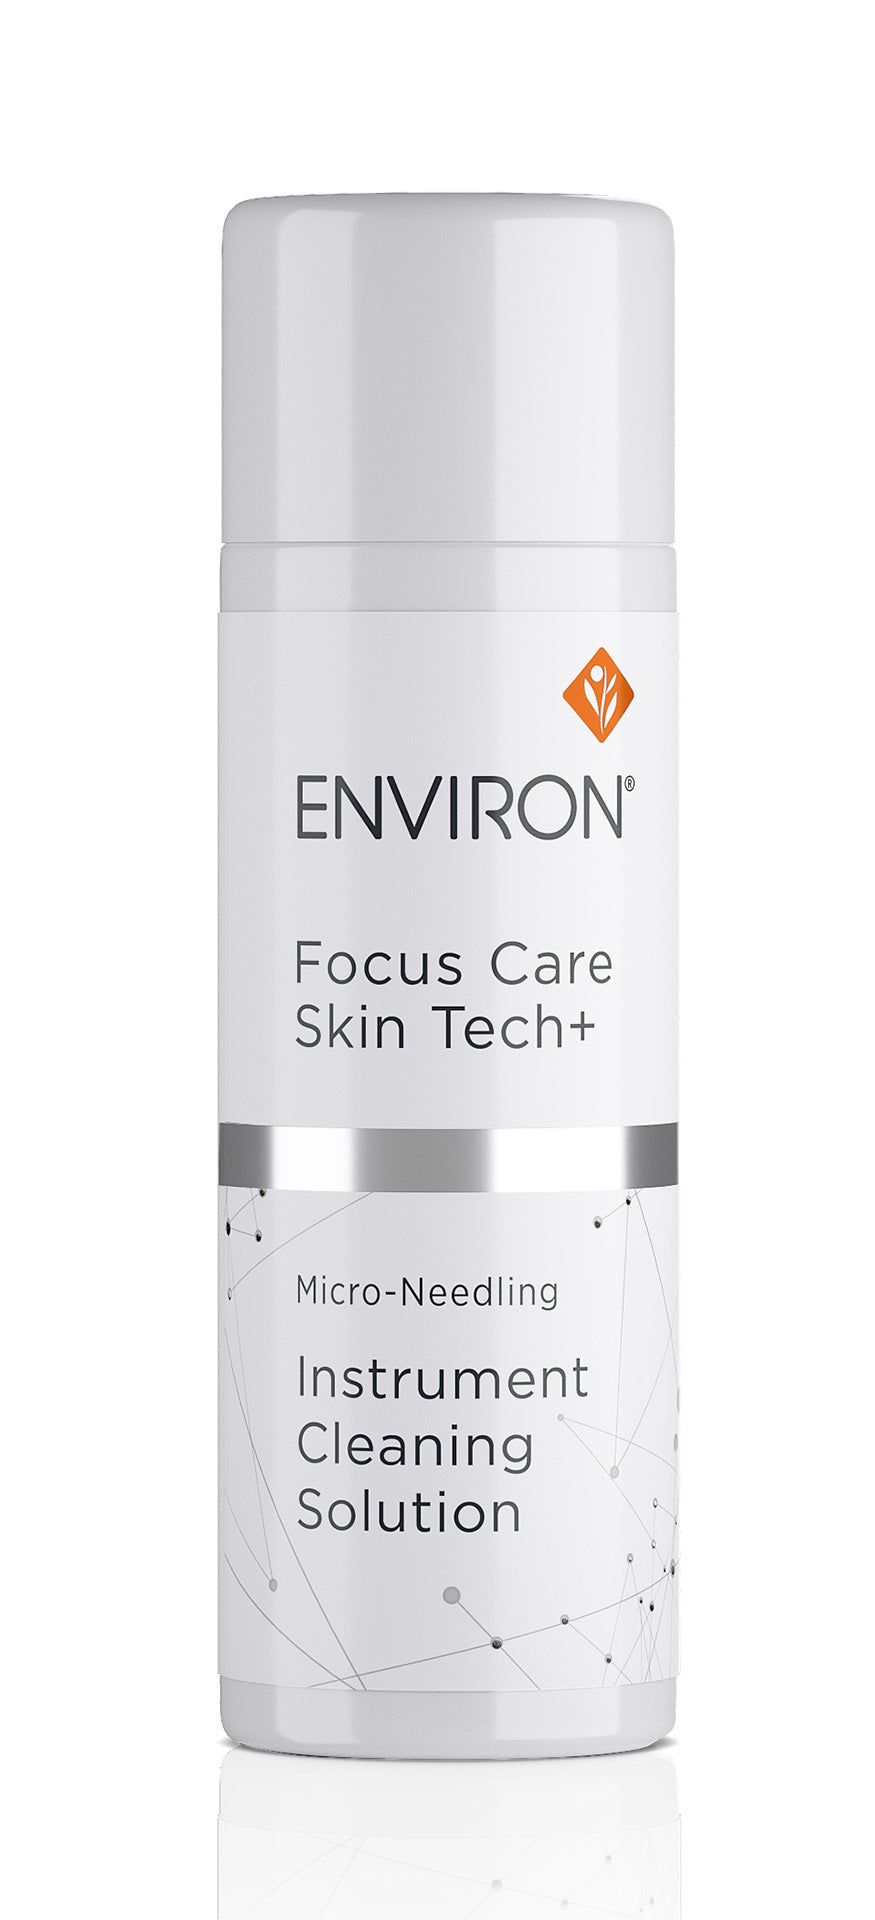 Focus Care Skin Tech+ | Micro-Needling Instrument Cleaning Solution